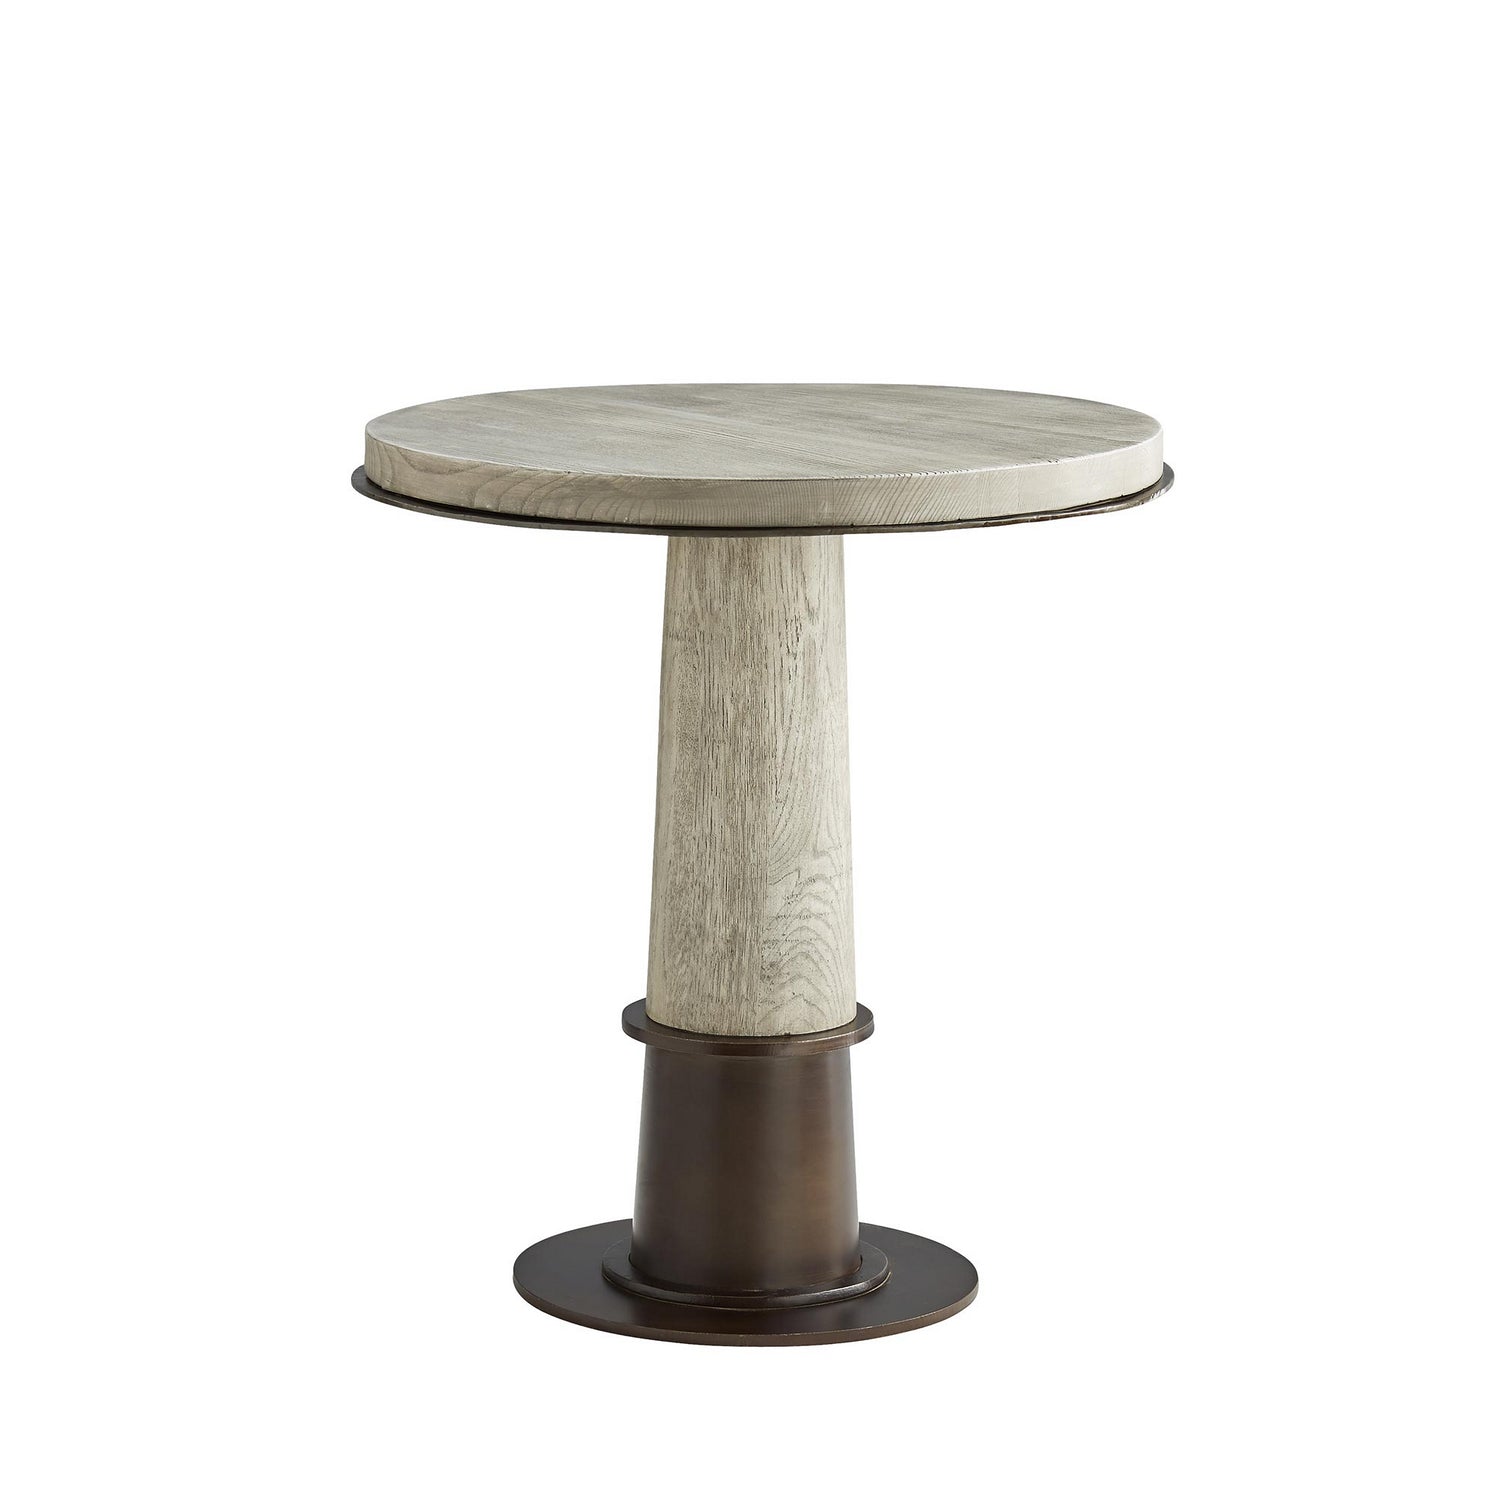 Side Table from the Kamile collection in Smoke finish